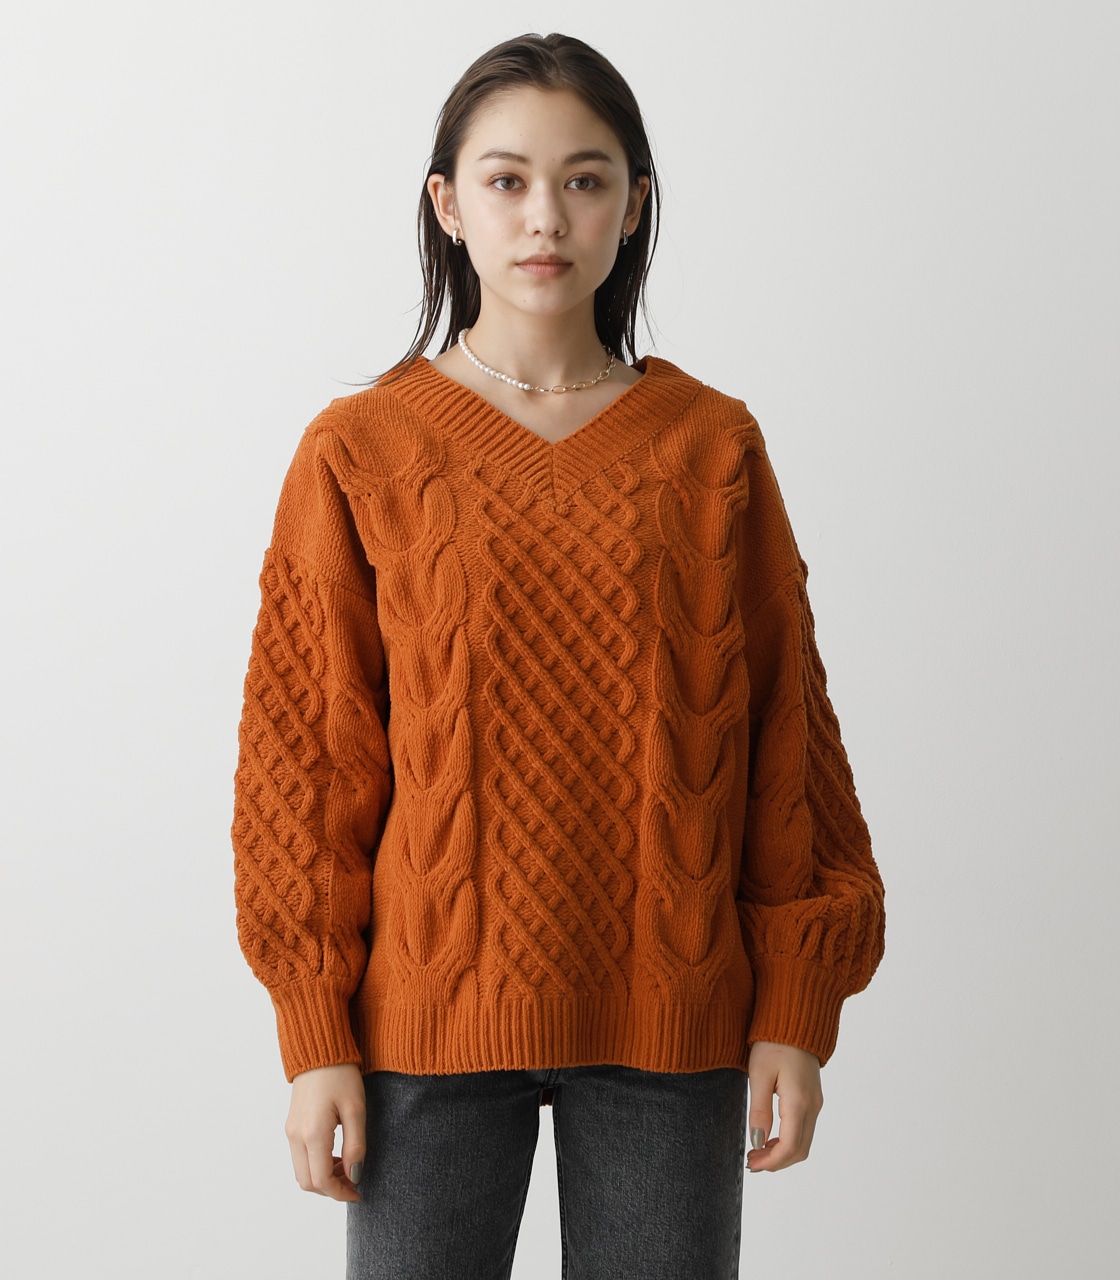 CHENILLE CABLE V/N KNIT TOPS/シェニールケーブルVネックニットトップス 詳細画像 D/ORG 5